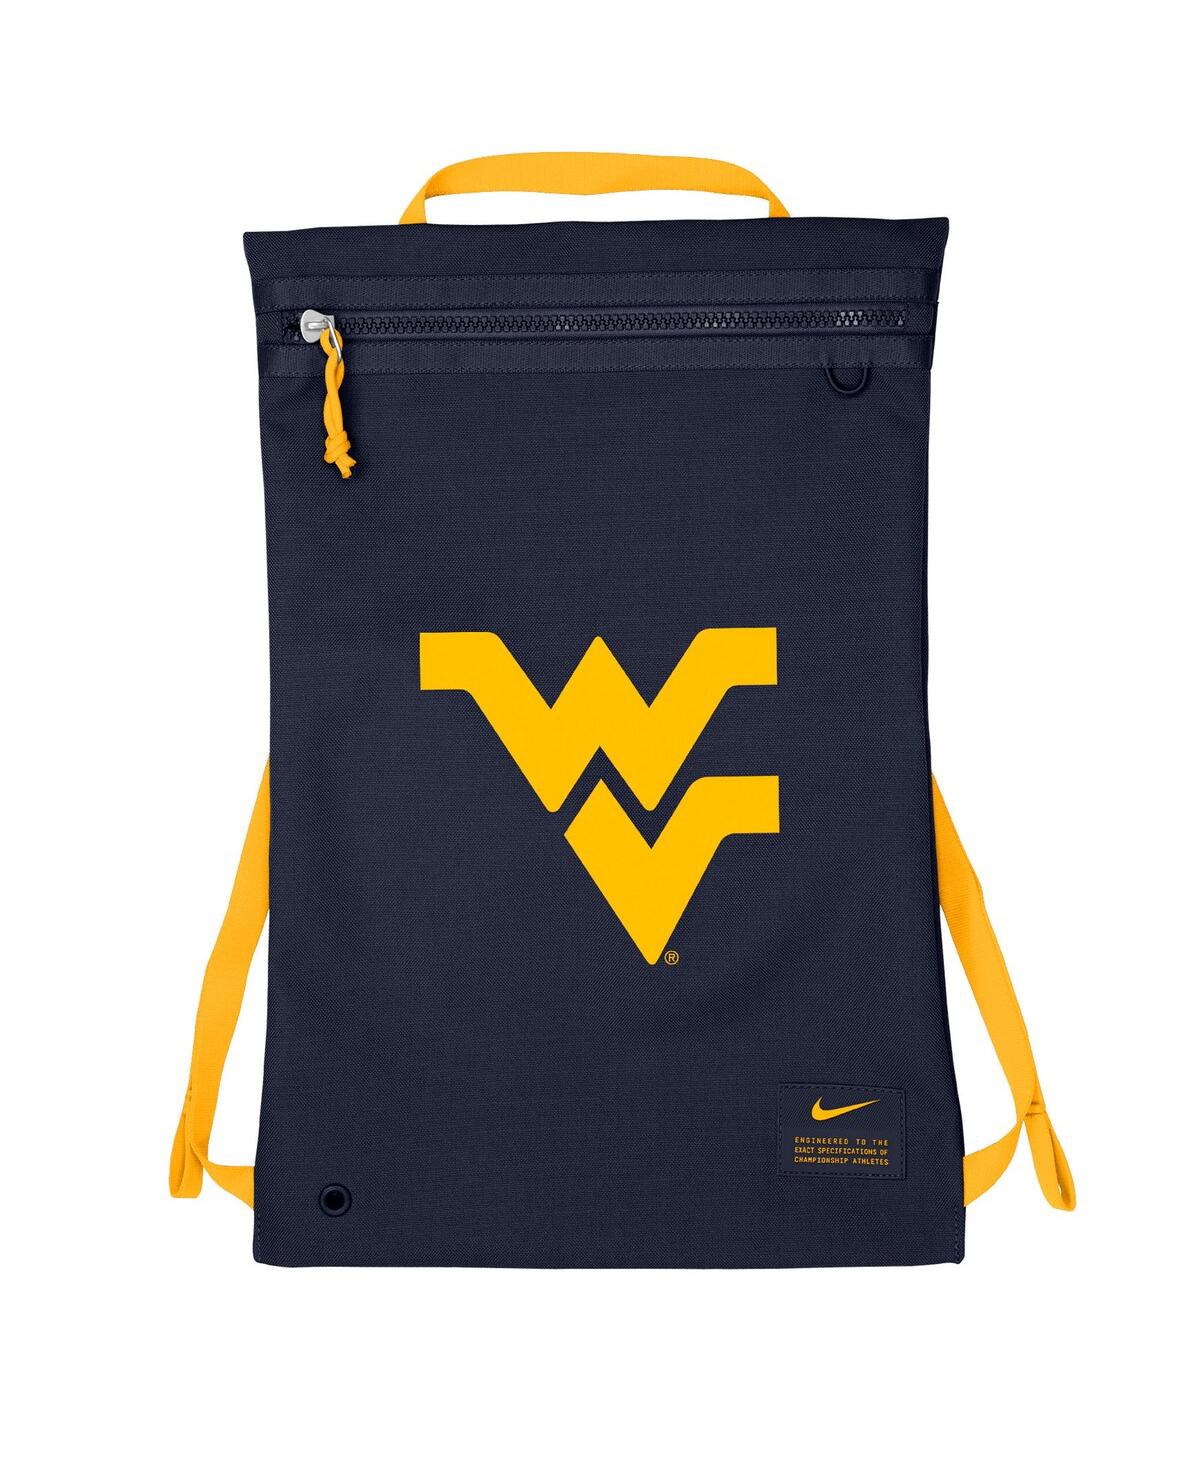 Men's and Women's Nike West Virginia Mountaineers Utility Gym Sack - Navy